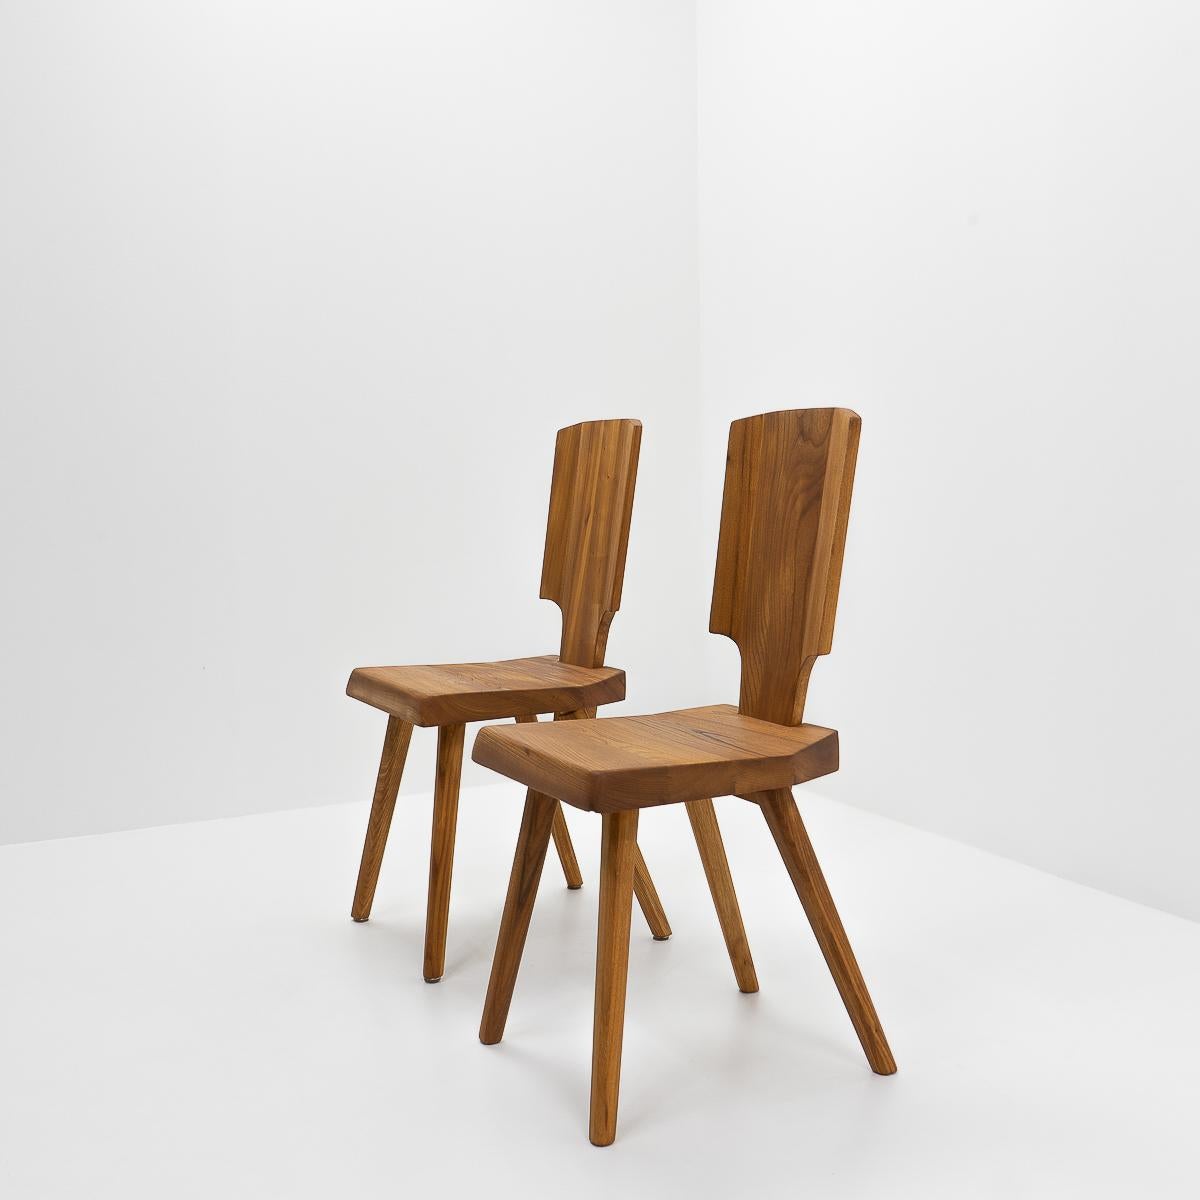 Vintage S28 chairs in elm: According to Pierre Chapo, the S28 is a modern interpretation of the traditional Alsatian chair, removed of any decorative elements, while maintaining its comfort and silhouette.

As with all furniture by Chapo, this